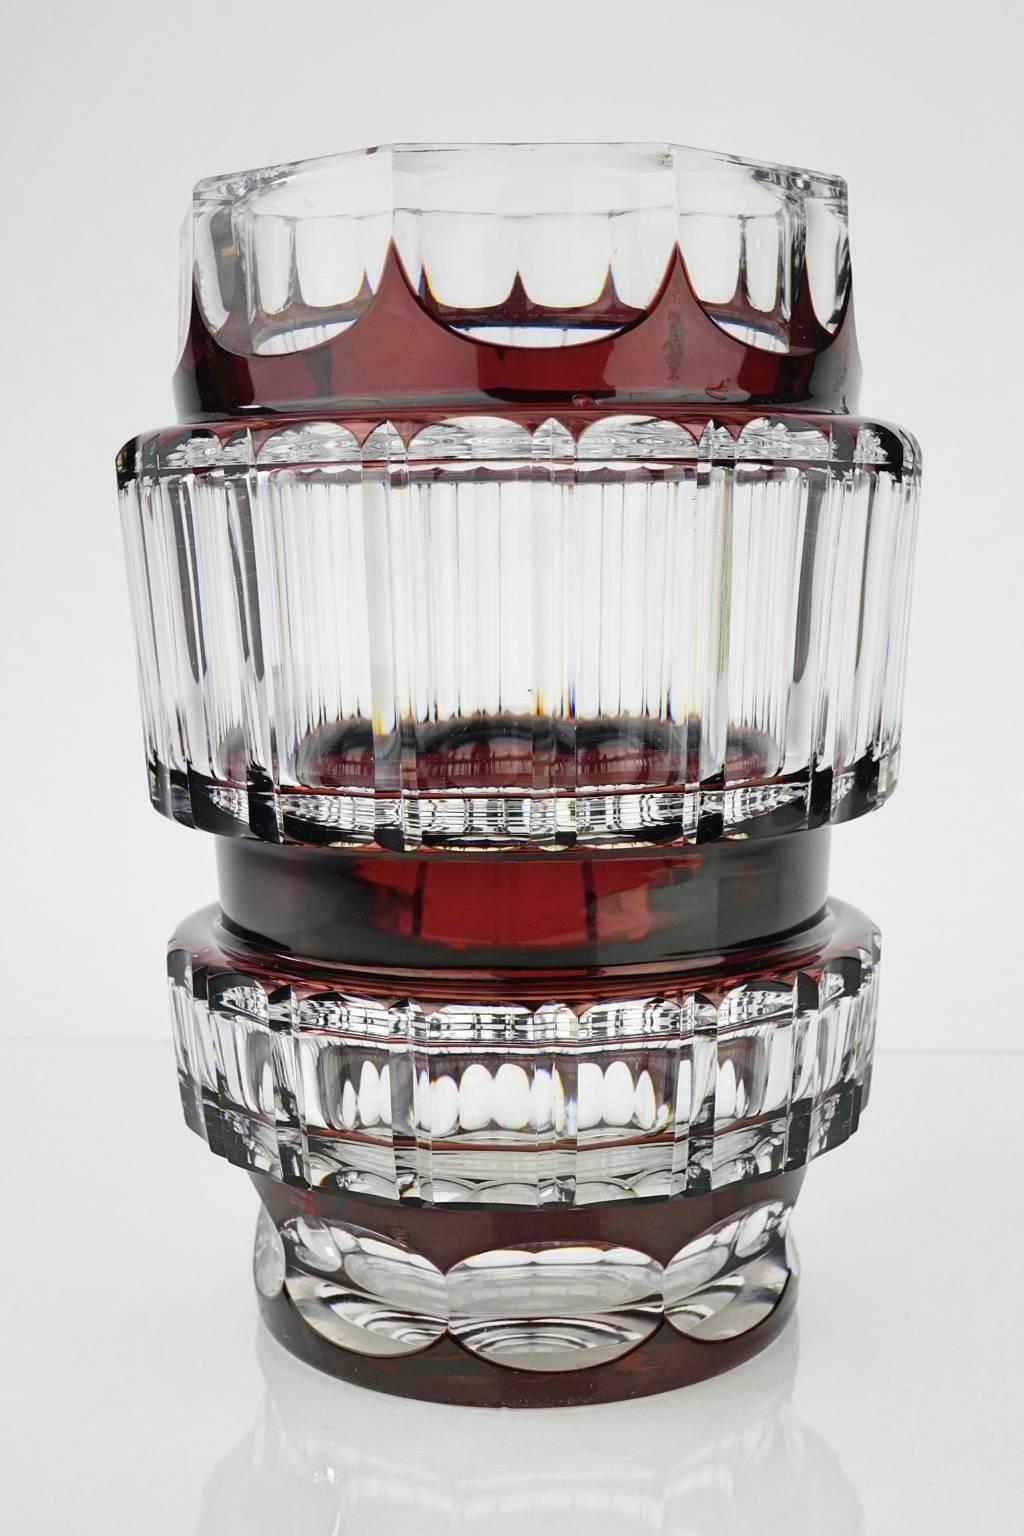 Art Deco vase in thick glass flashed in prune color. Kasala design by Joseph Simon (1874-1960) for Val Saint Lambert.
 